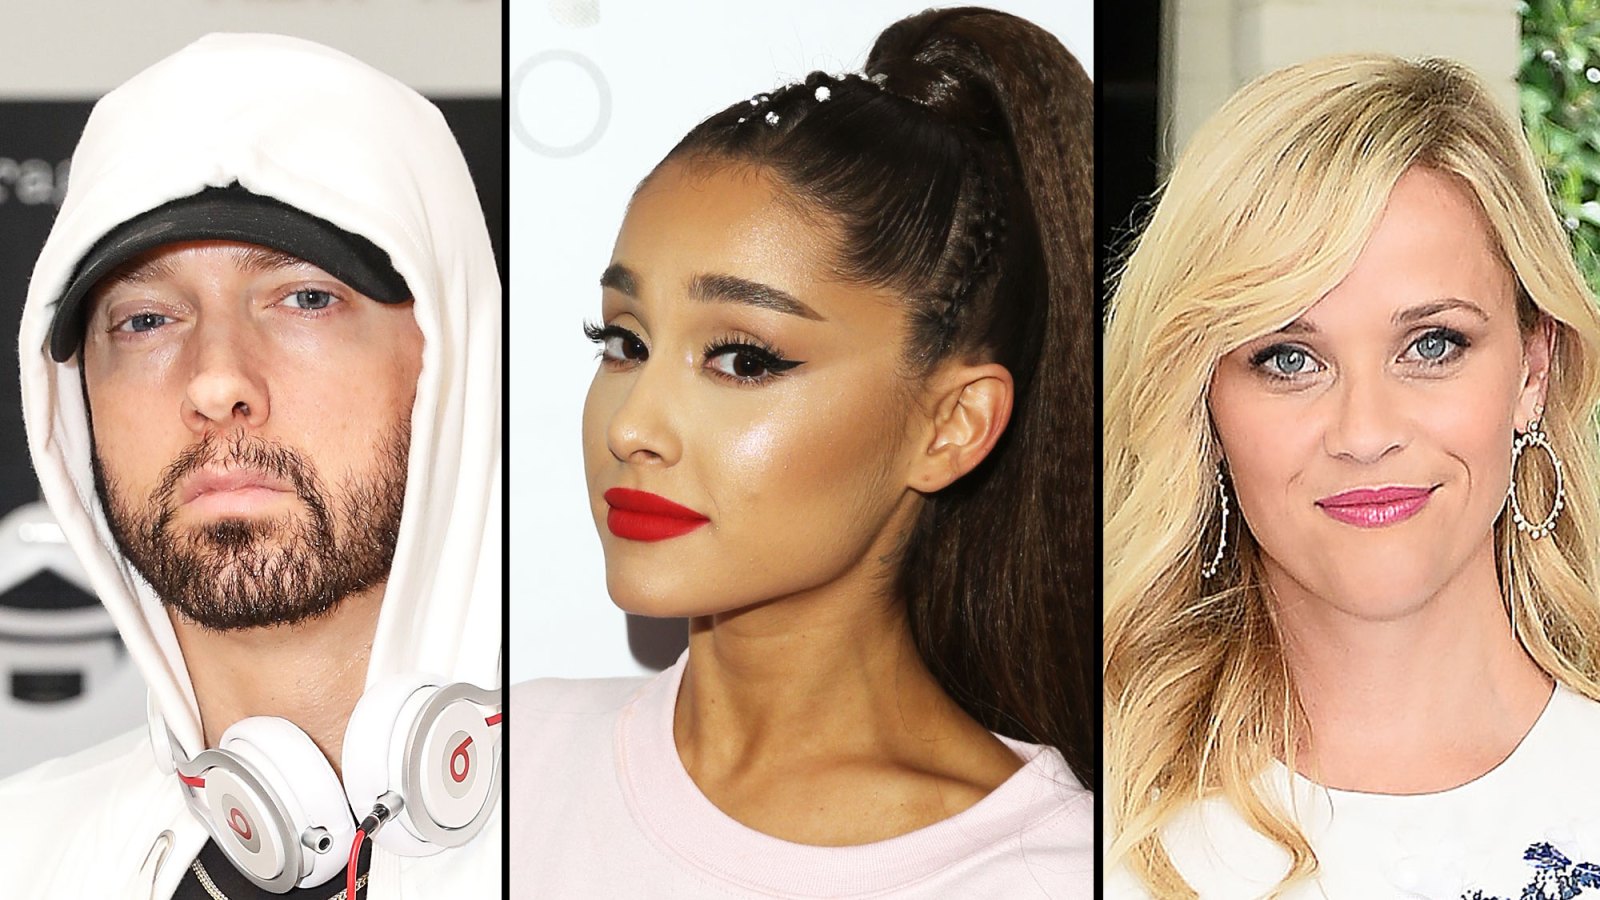 Eminem, Ariana Grande and Reese Witherspoon